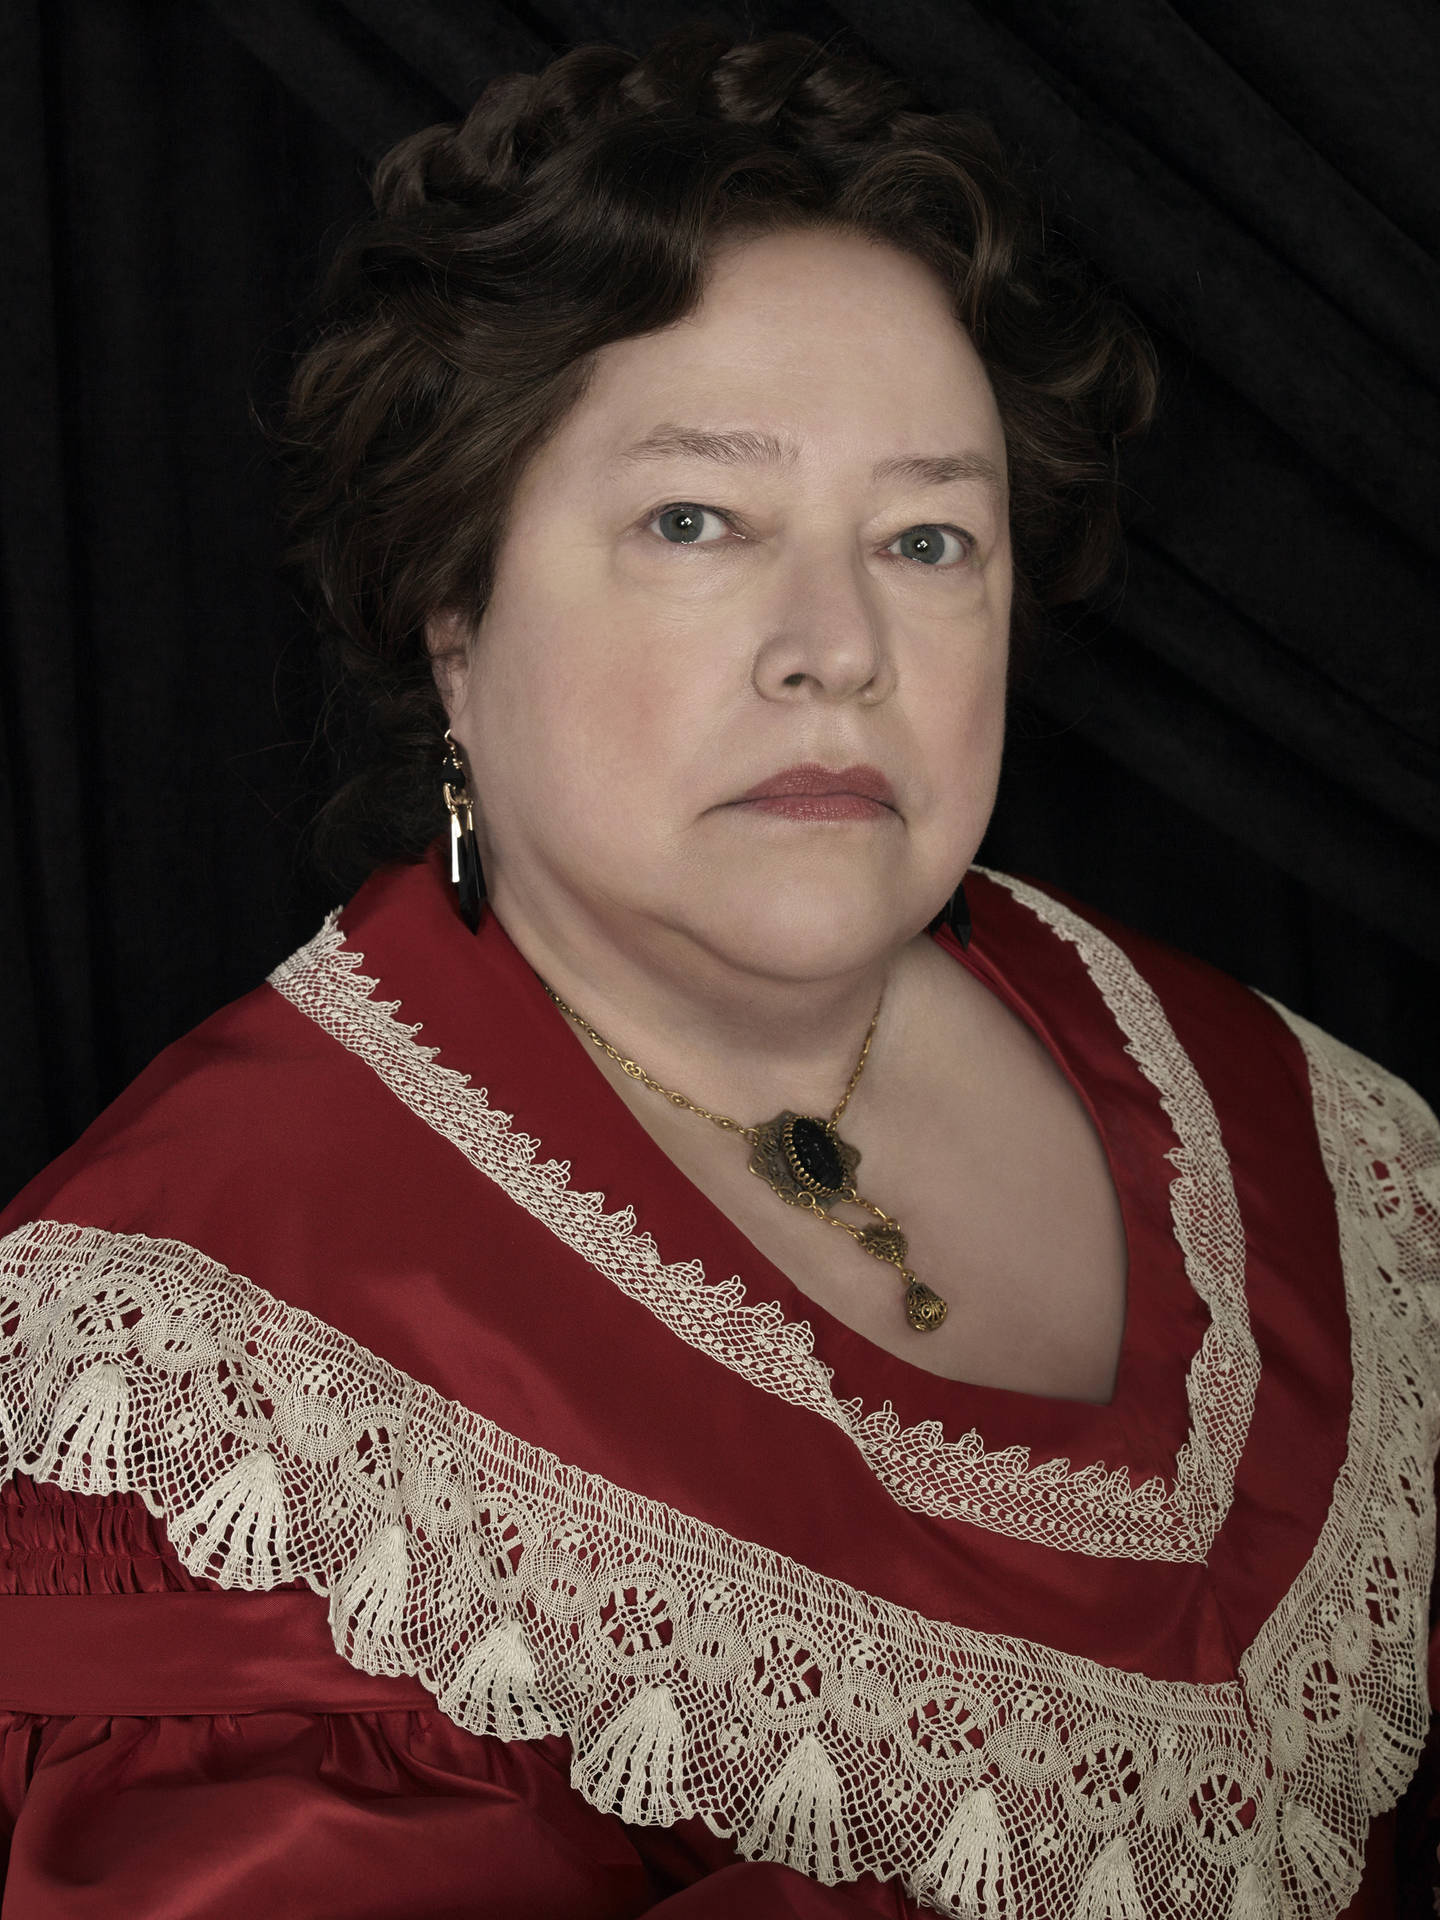 Kathy Bates In Her Royalty Role Wallpaper